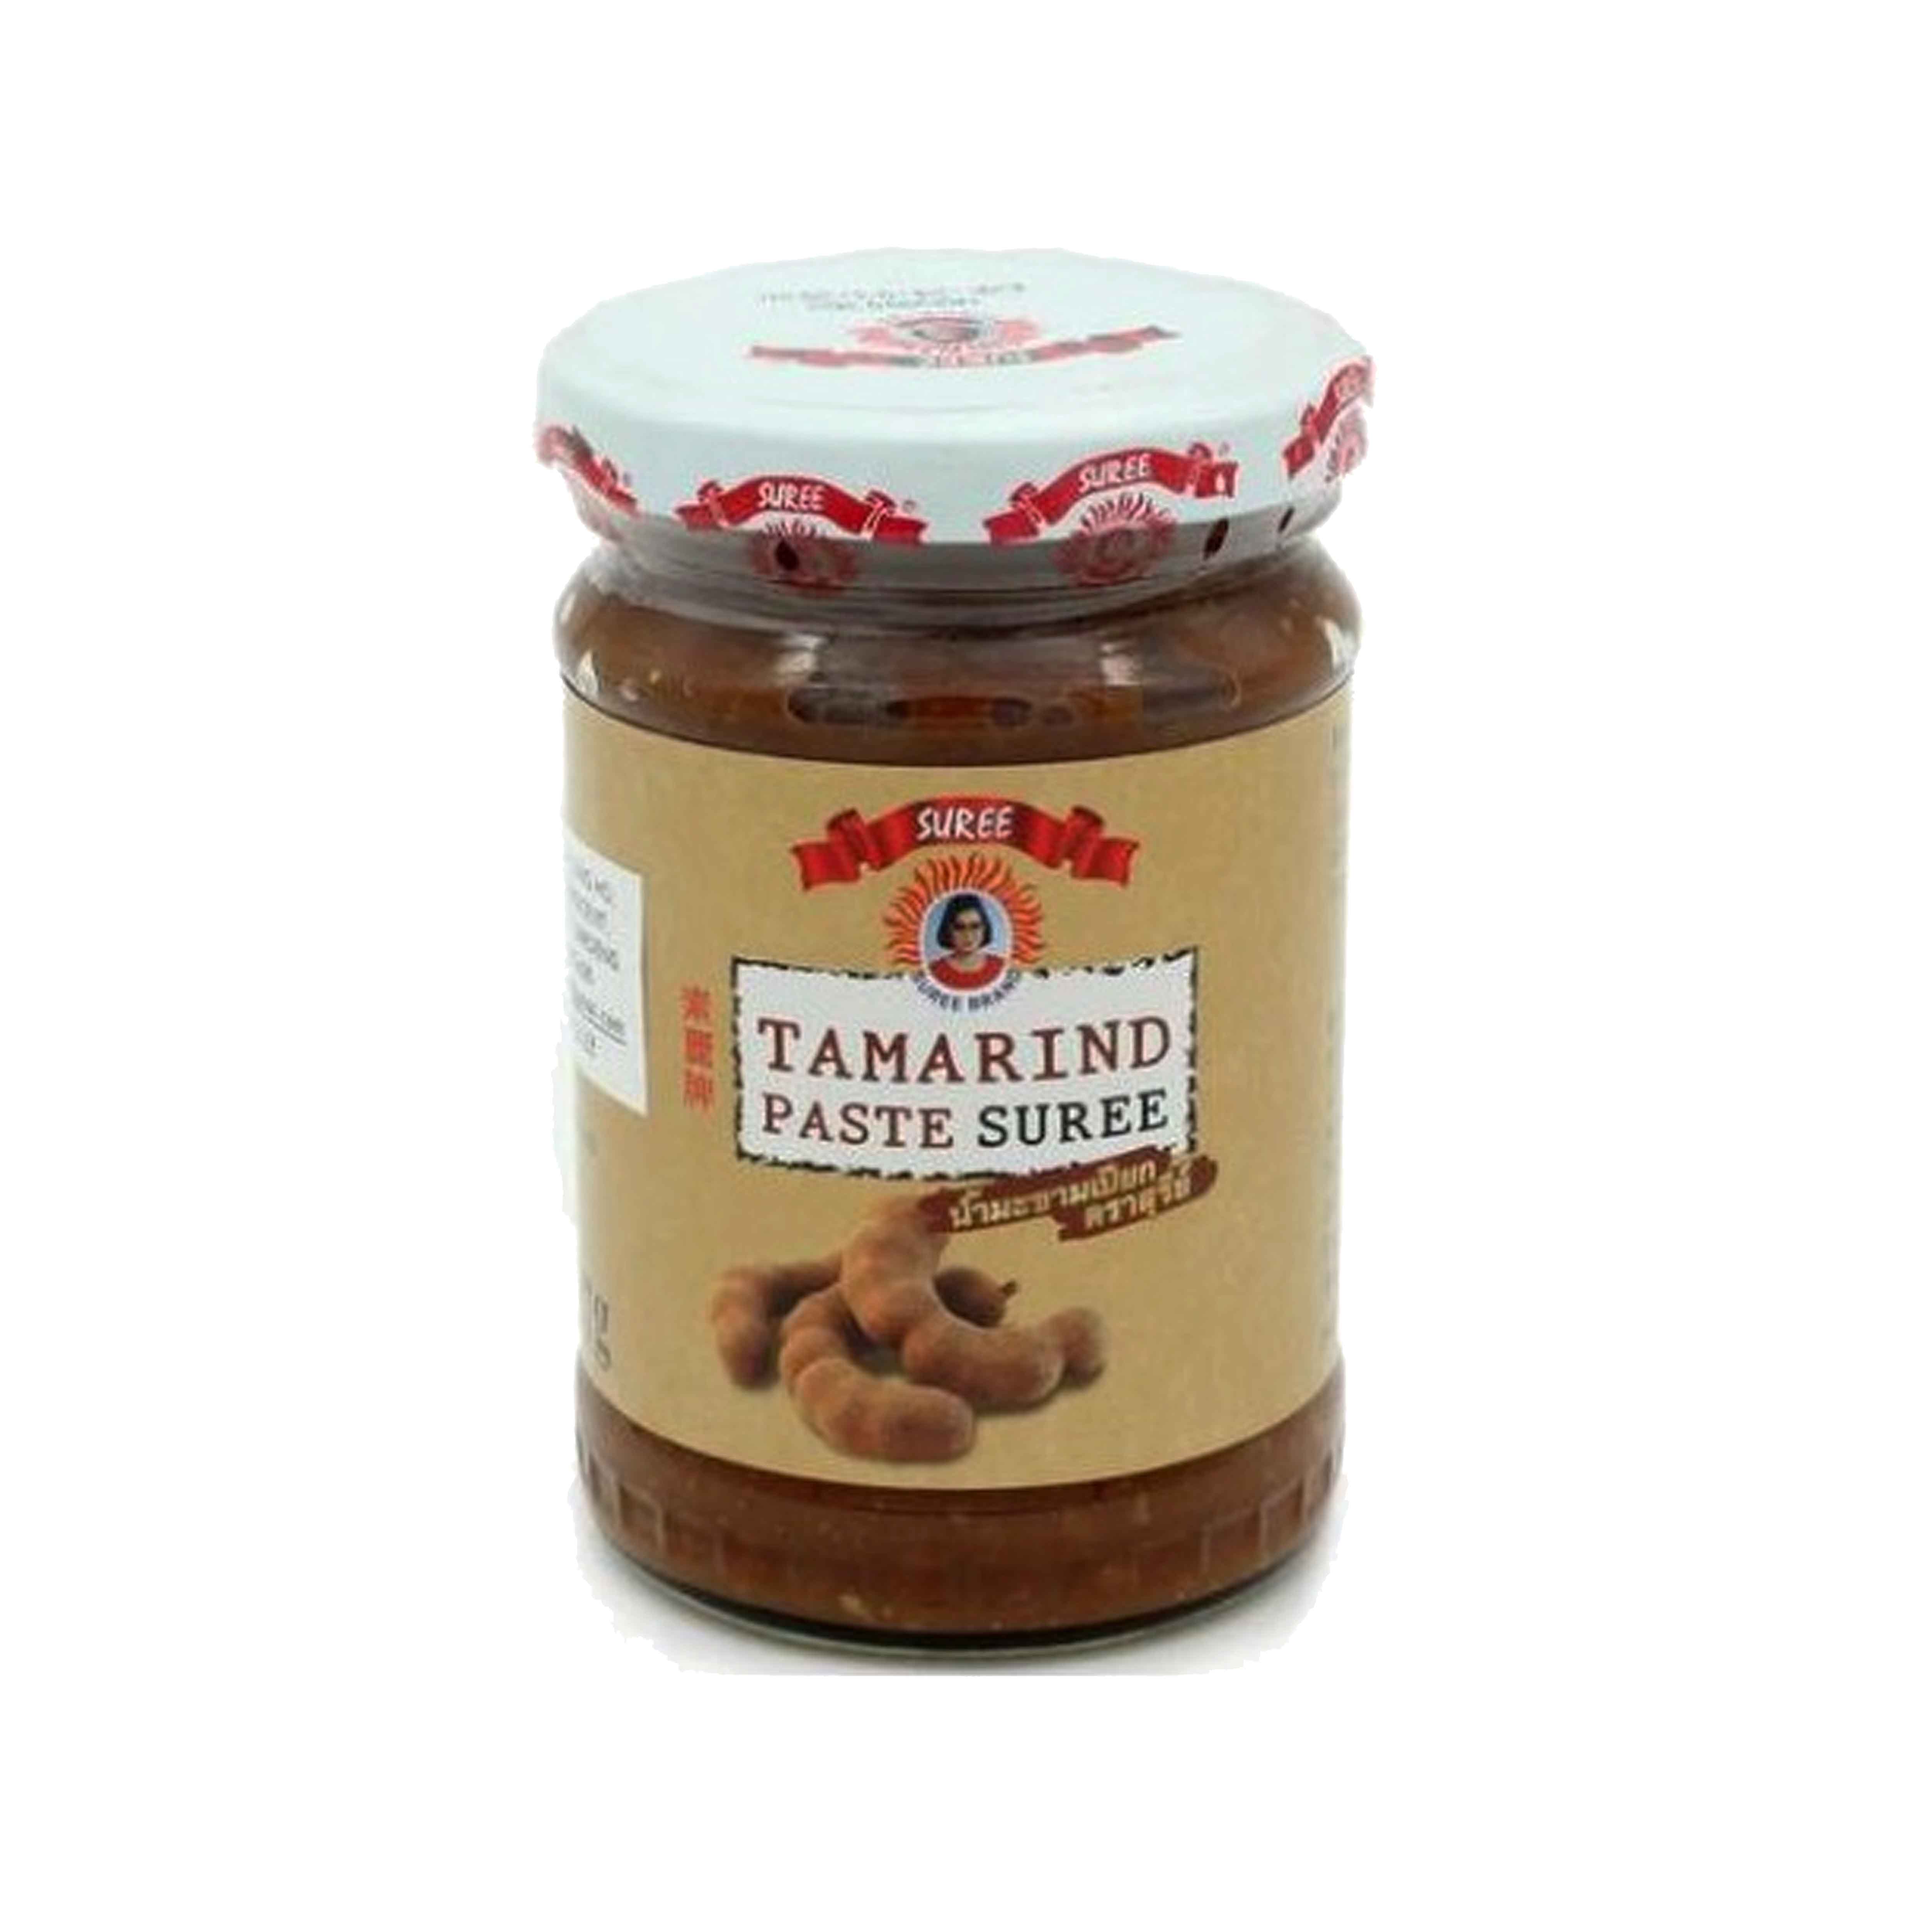 Suree Tamarind Paste 454g Buy Sell Online Speciality Ingredients With Cheap Price Lazada Ph